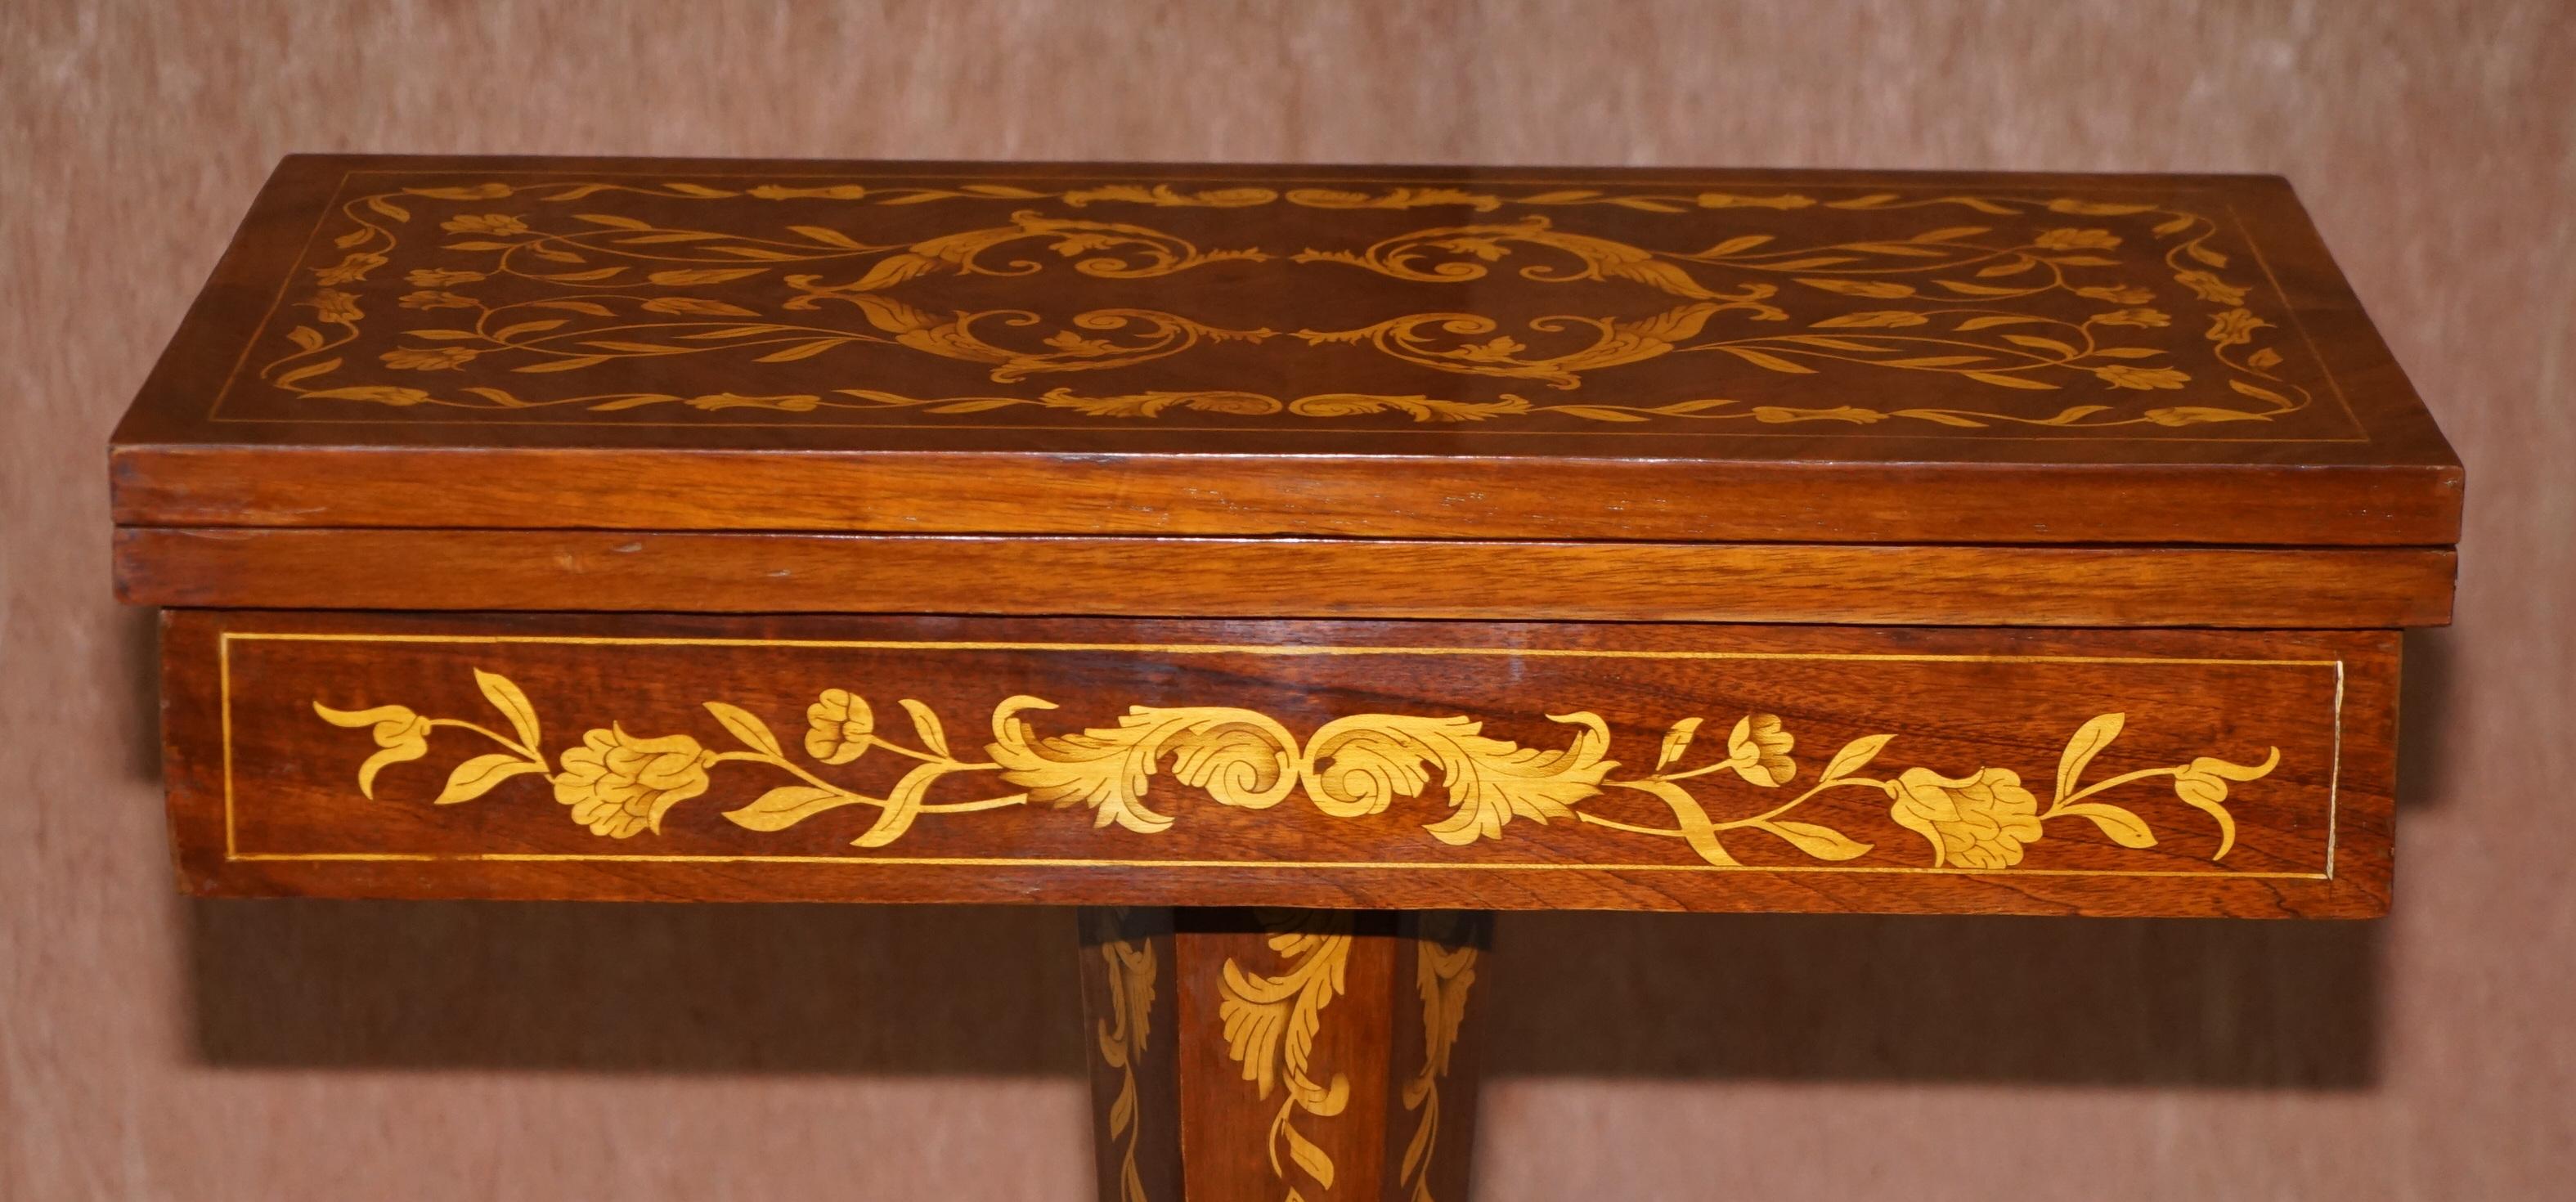 Wood Sublime Antique Dutch Games Card Table with Chess Board Top Marquetry Inlaid